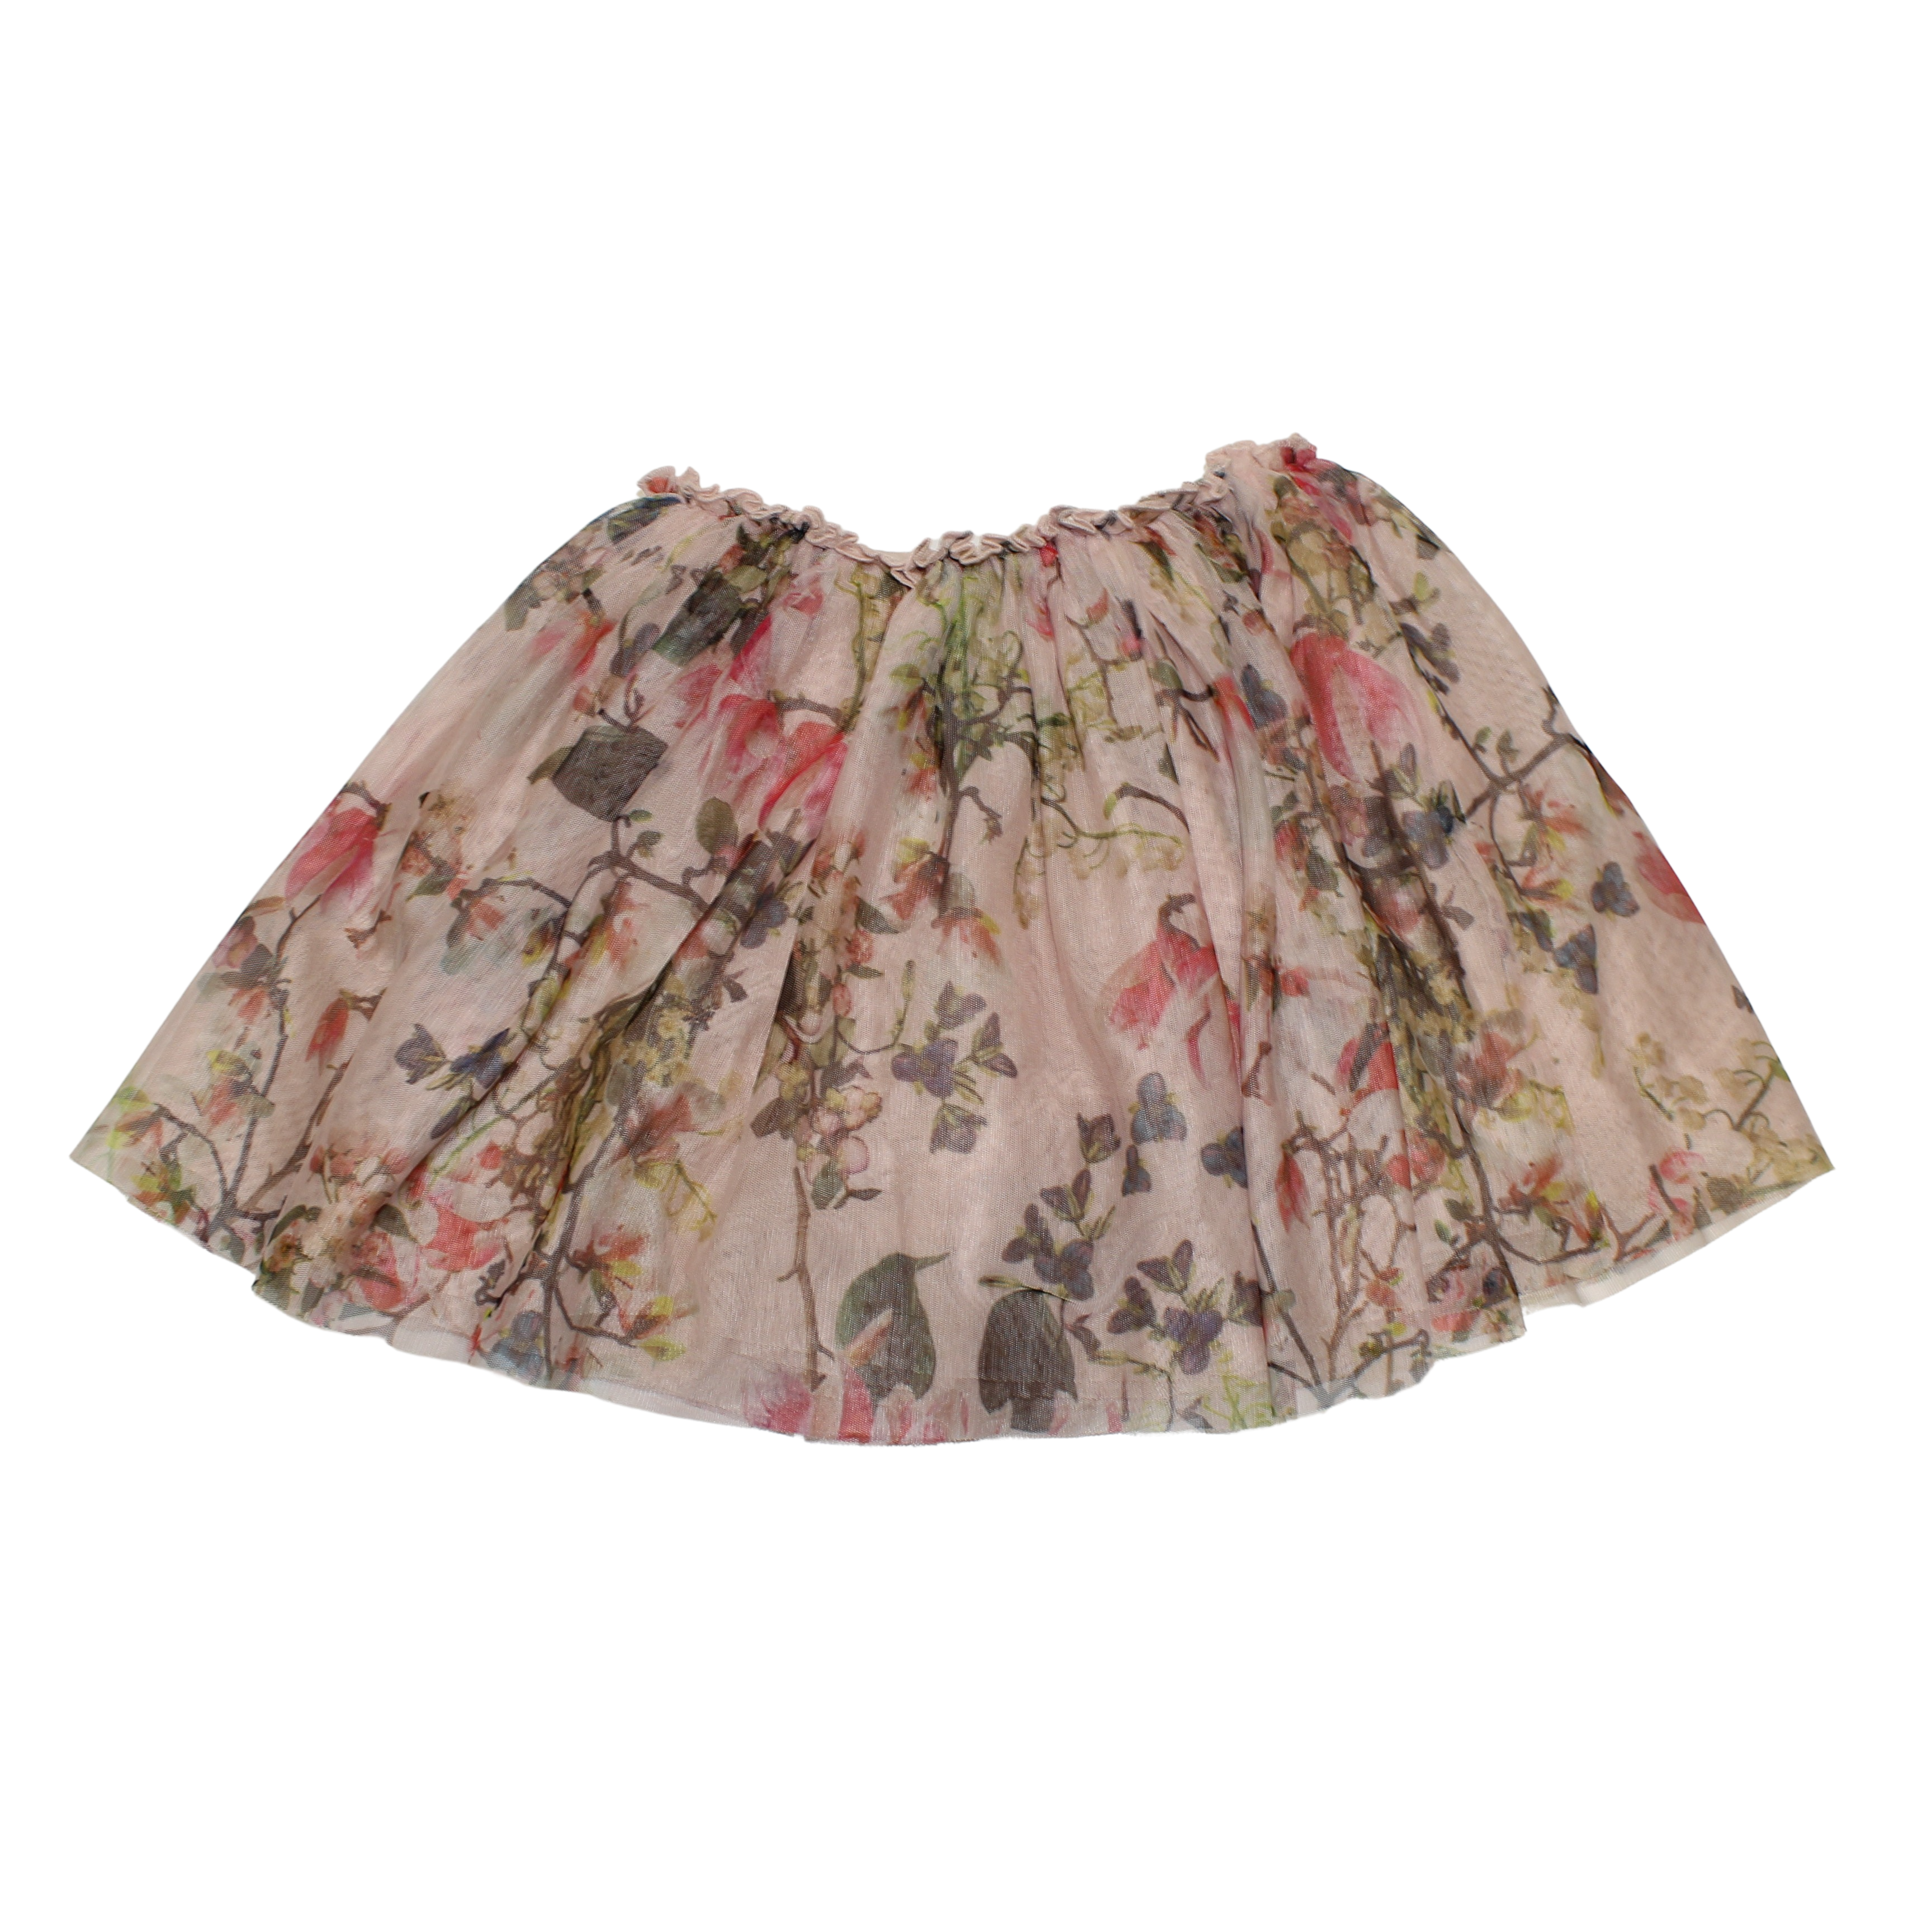 Floral Tulle Skirt